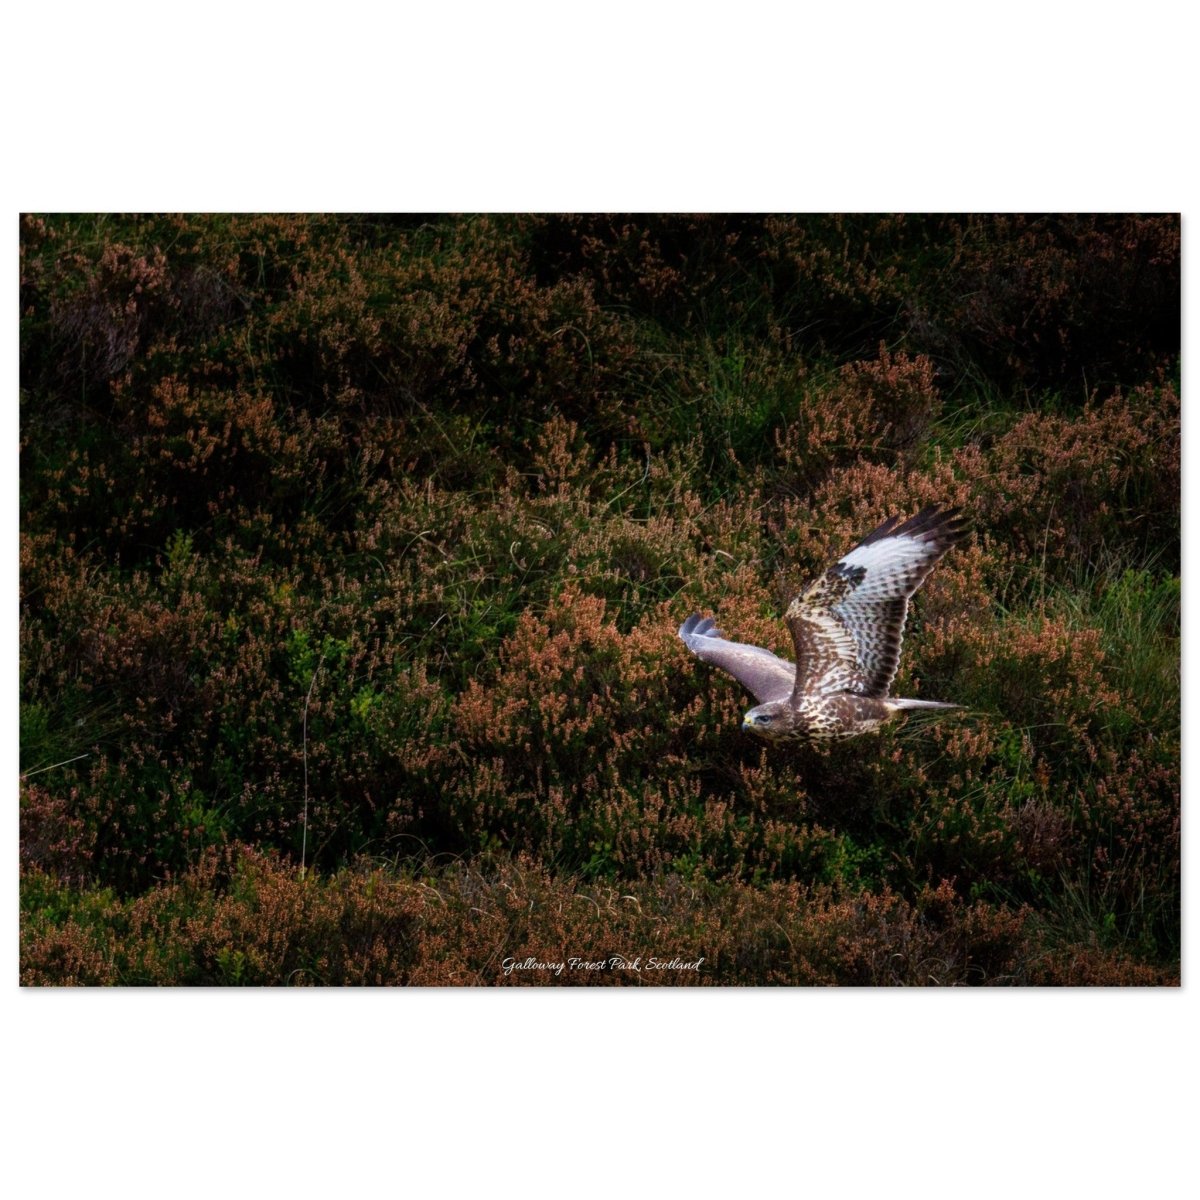 20x30 cm / 8x12″ Wild Hawk of Galloway by Picture This